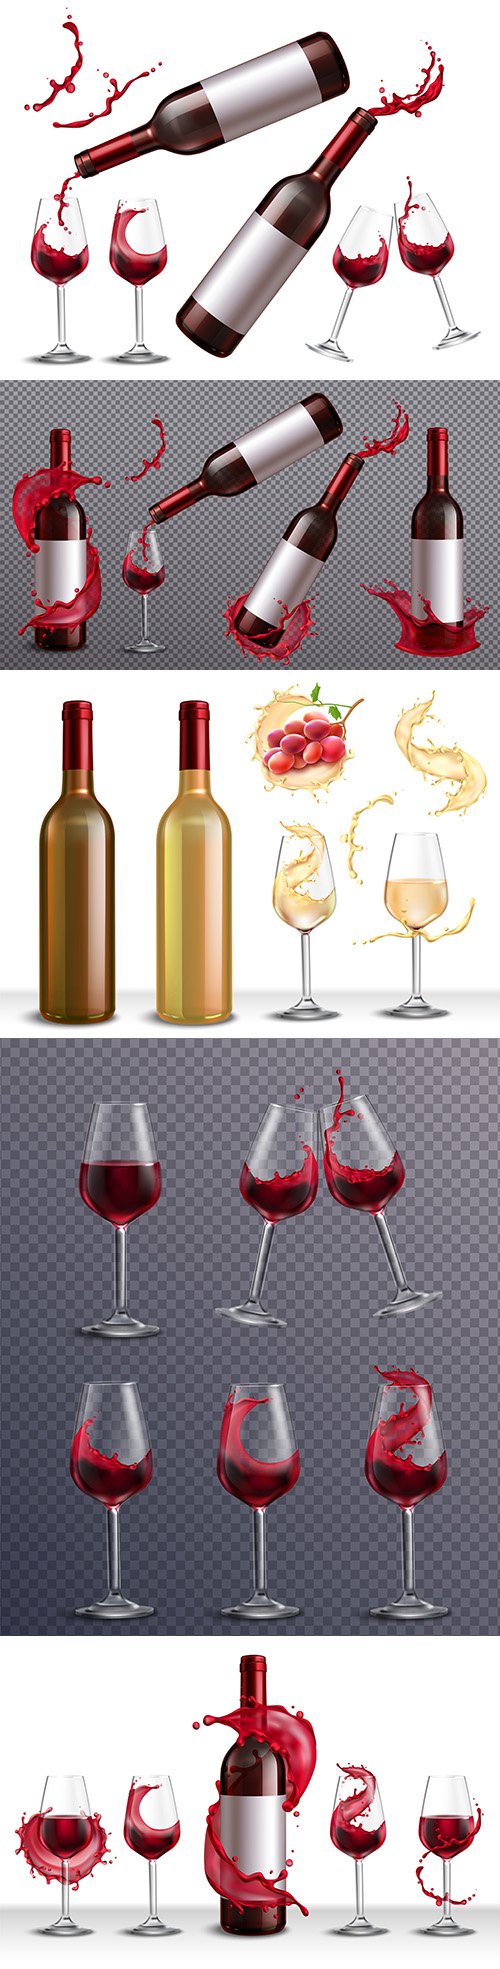 Bottle of red and white wine realistic set with glasses